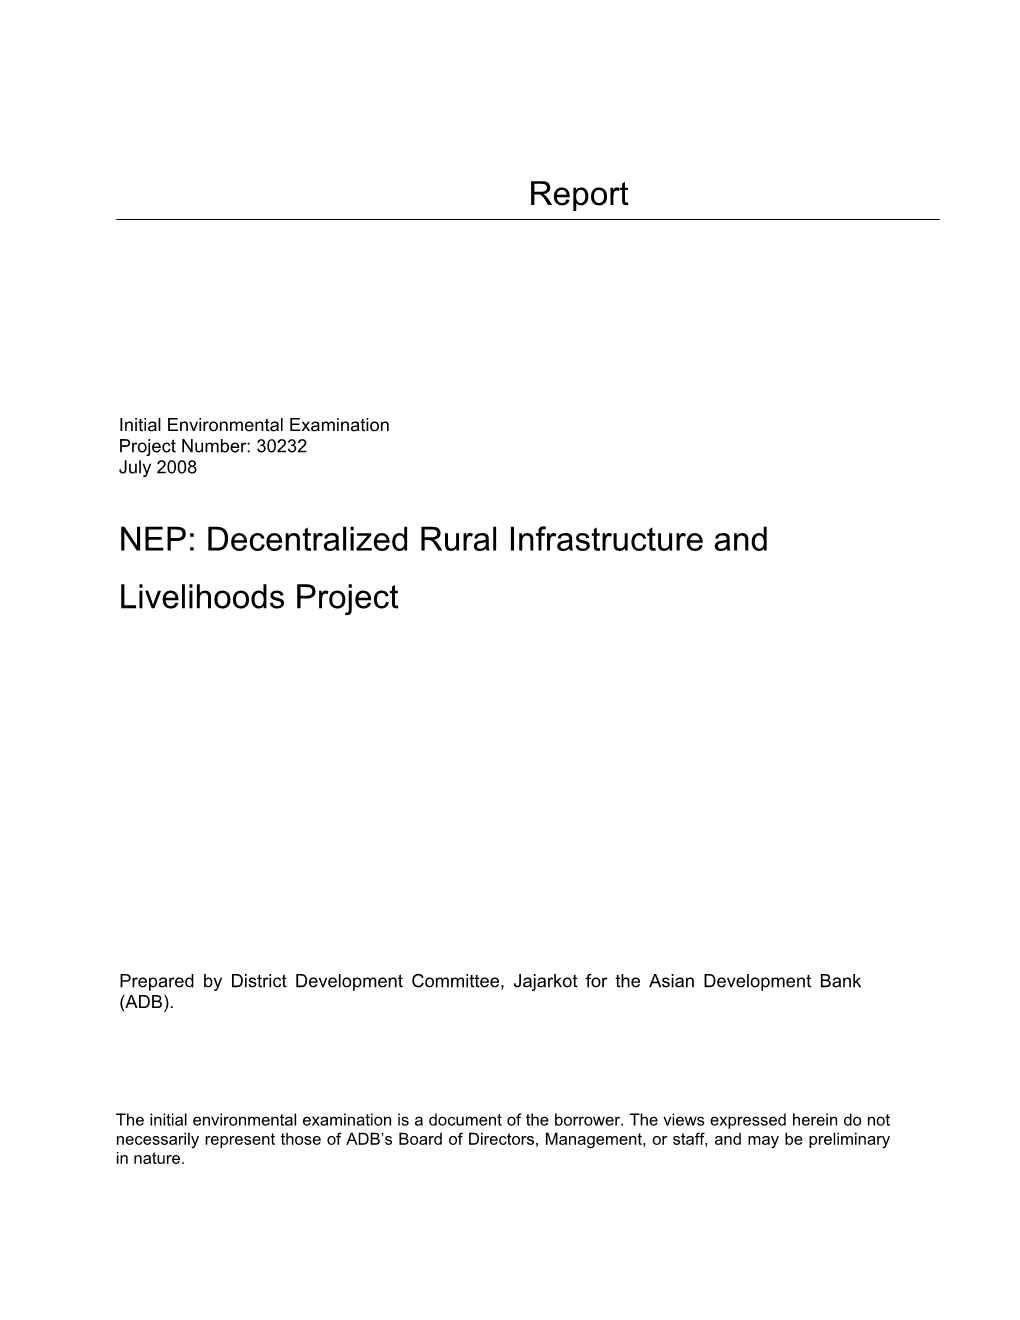 Decentralized Rural Infrastructure and Livelihoods Project